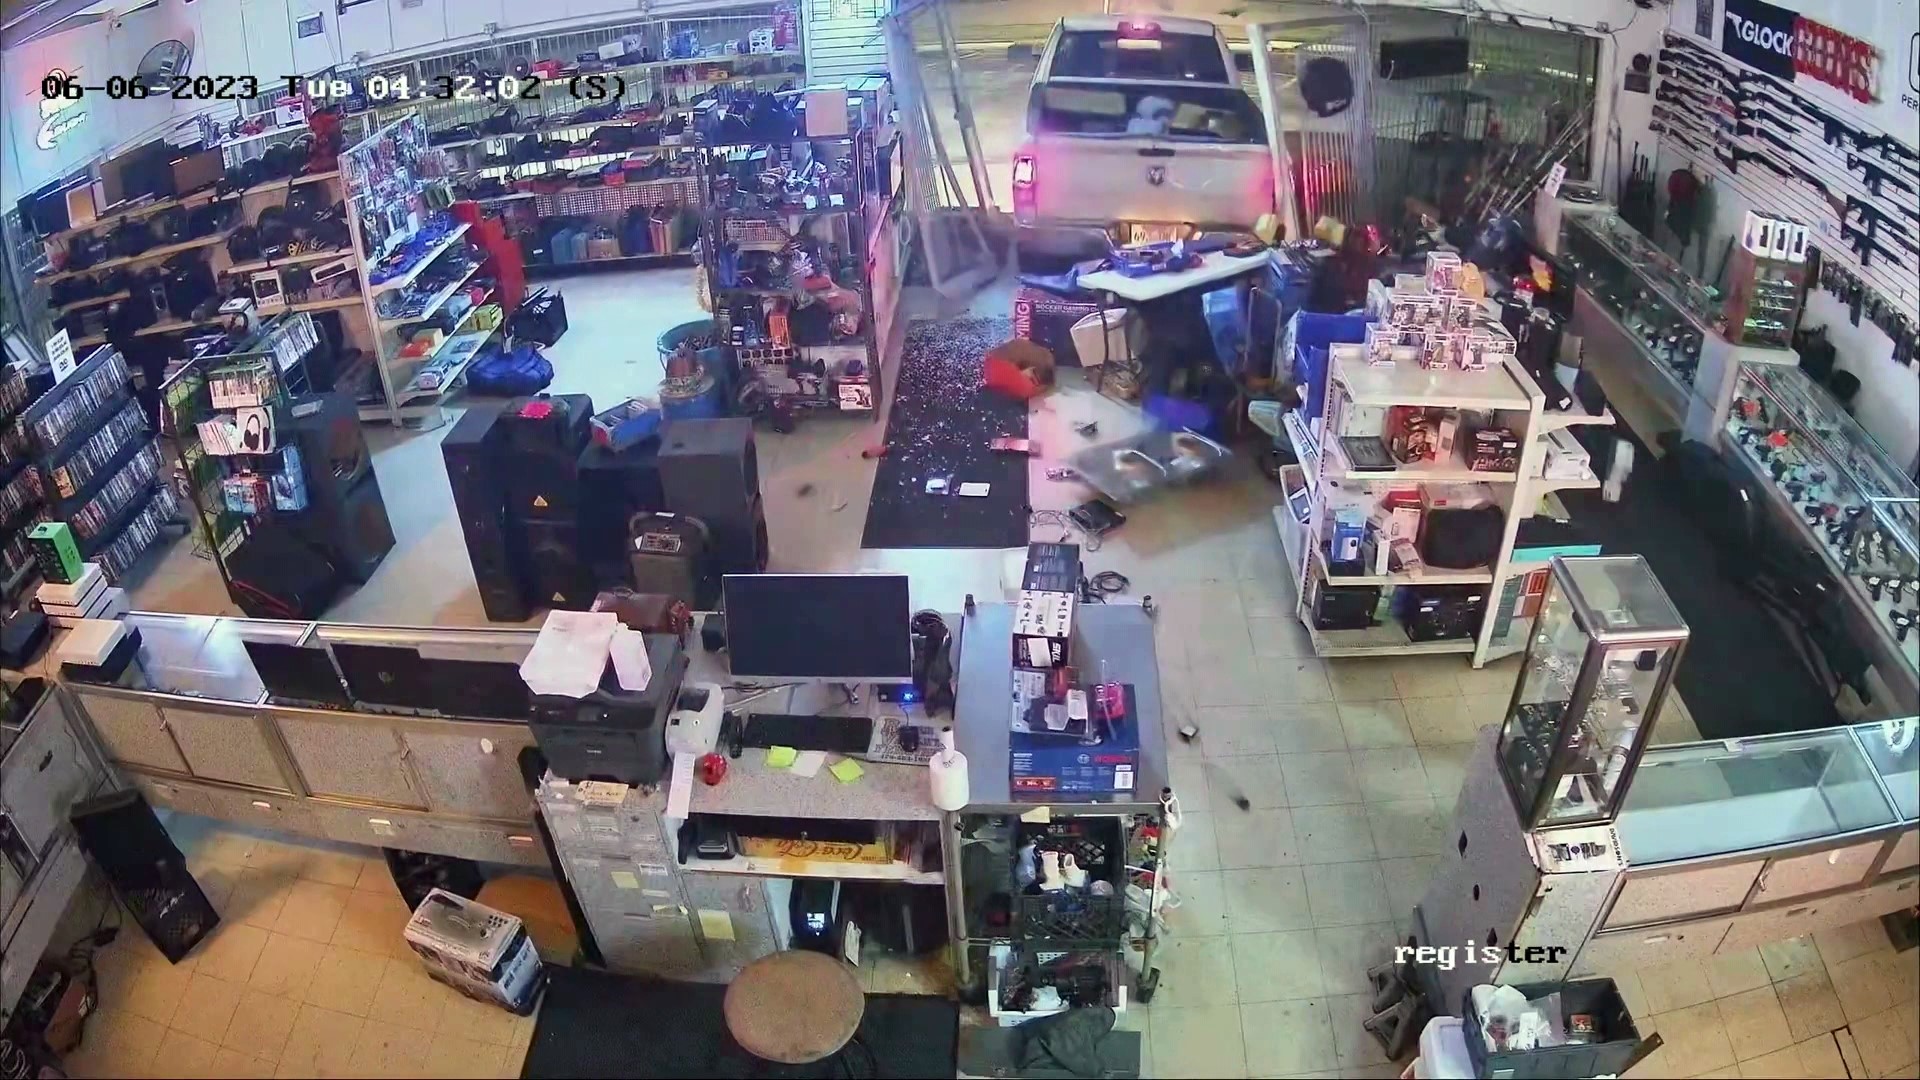 3 Arrested In Connection To Fort Smith Pawn Shop Burglary